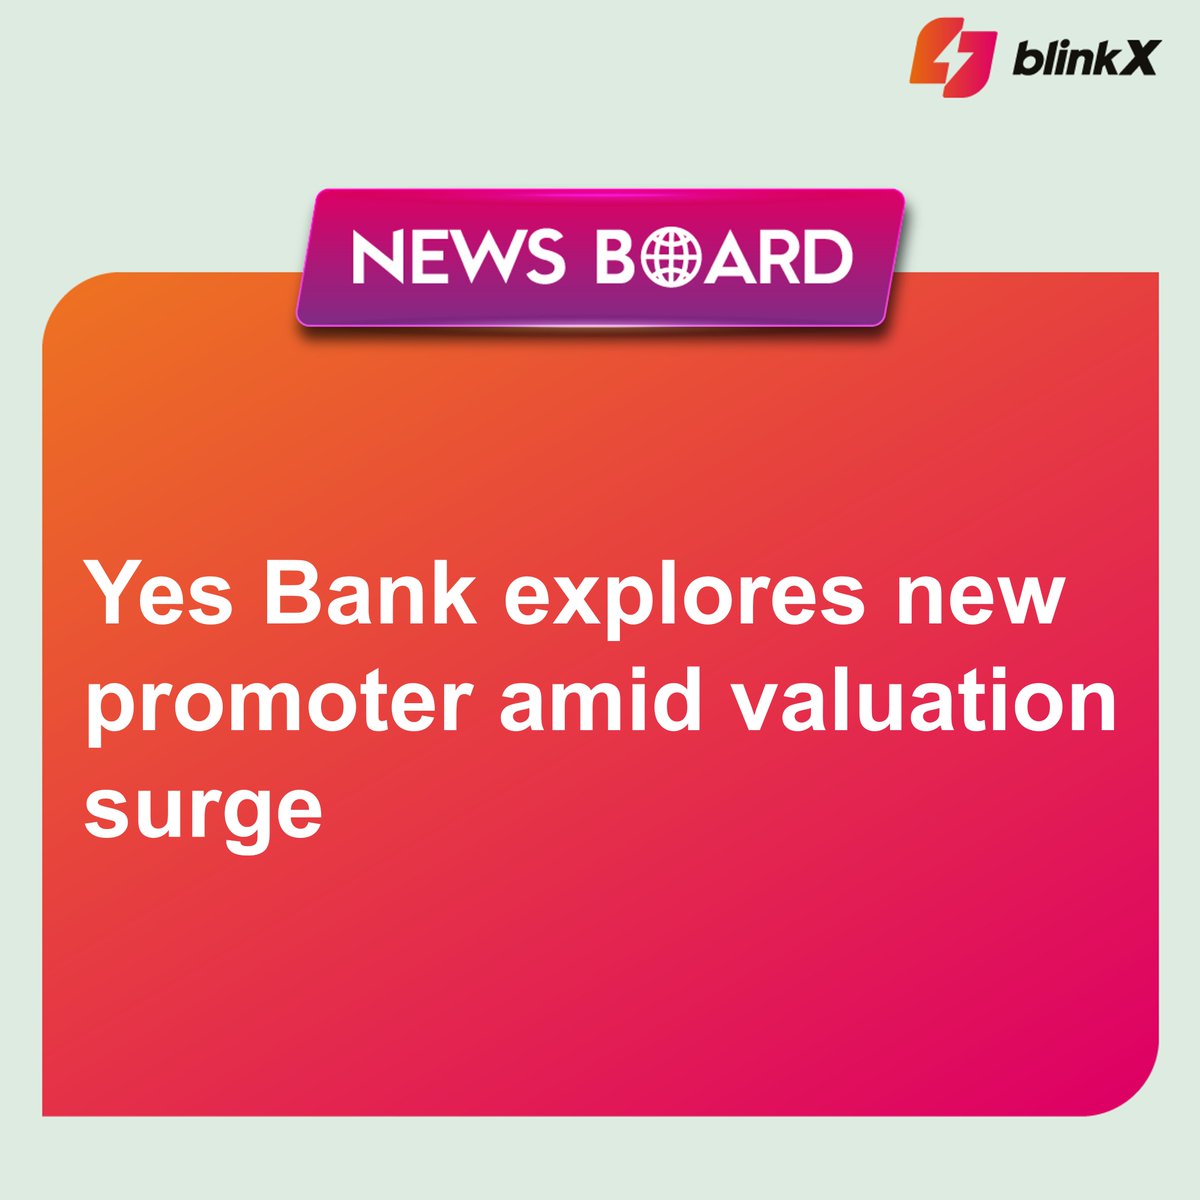 Yes Bank seeks new promoter, aims for $8-9 billion valuation, surpassing current market cap. RBI approval sought for stakes exceeding 26%. Citigroup's India unit aids in the process.

#yesbank #RBI #PromoterSearch #nse #bse #sharemarketindia #news #stockmarket #investing #trading